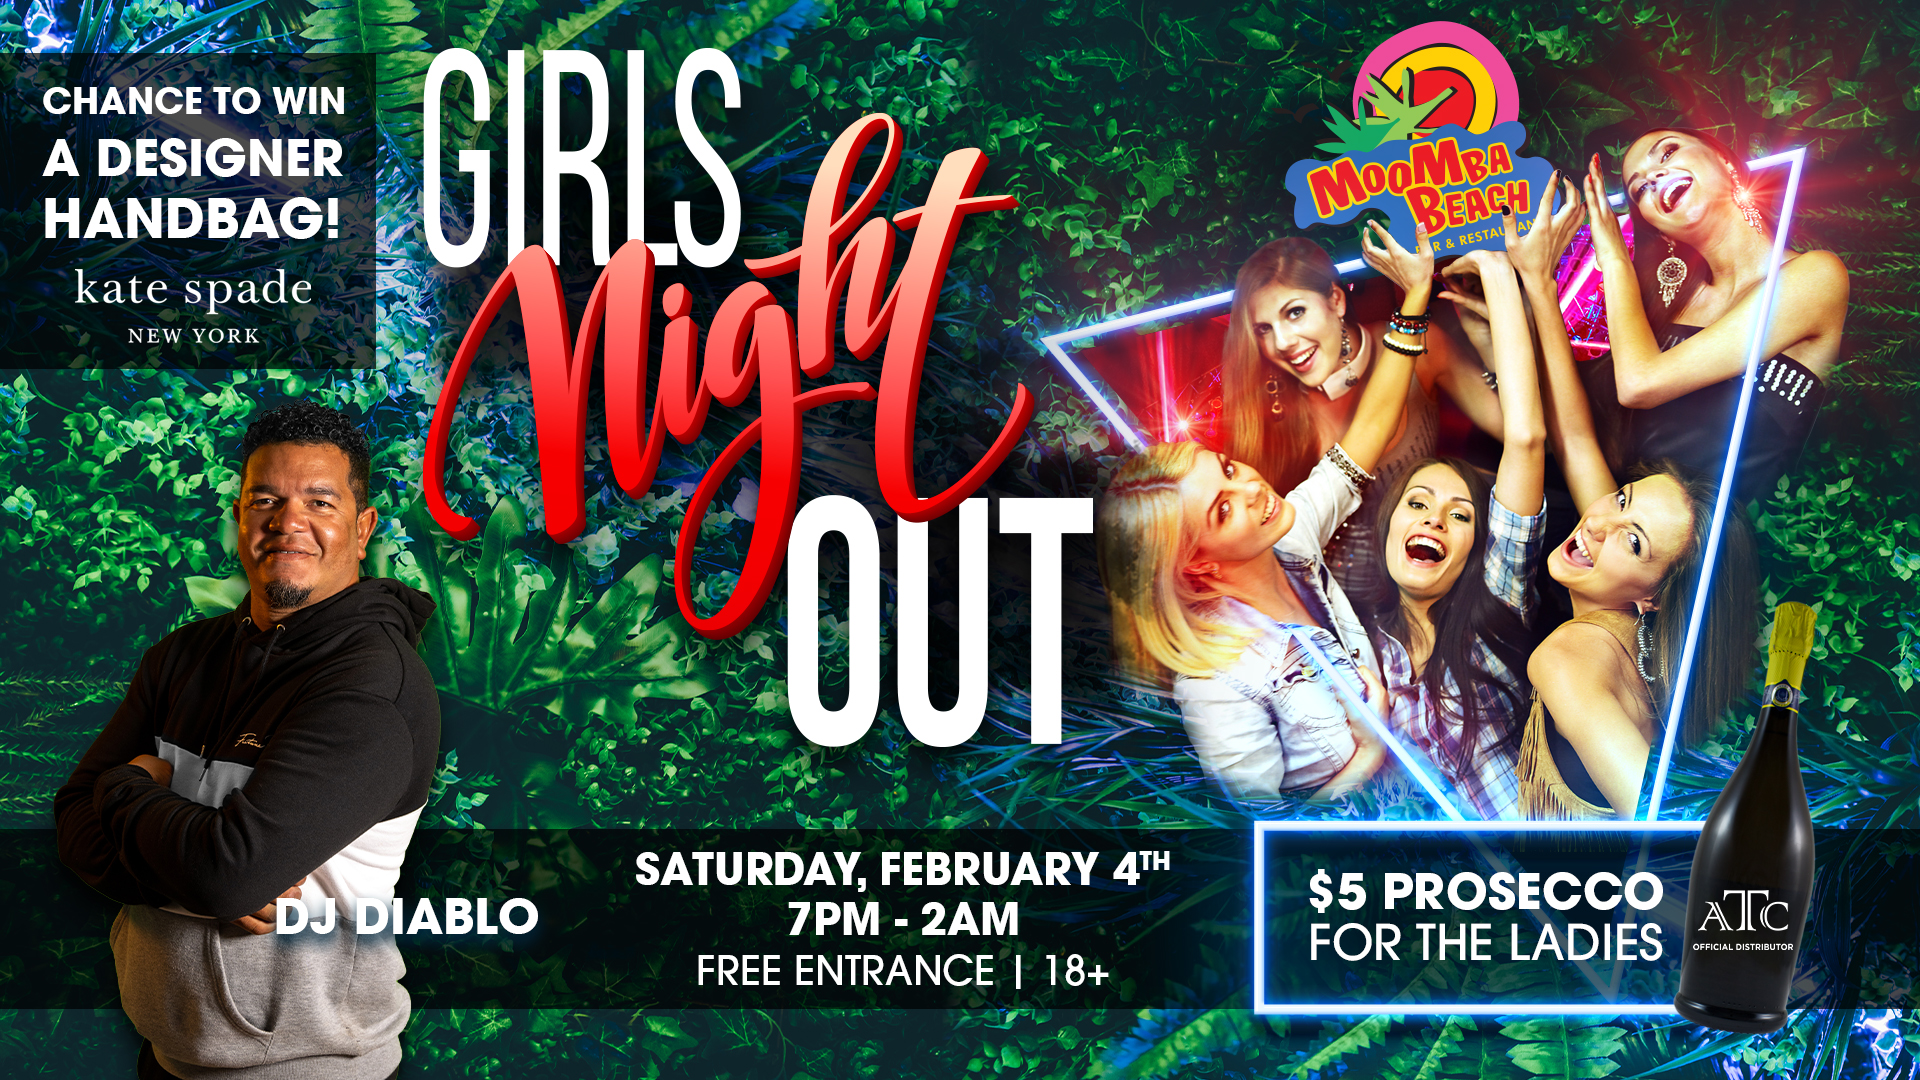 Girls Night Out Party at MooMba Beach